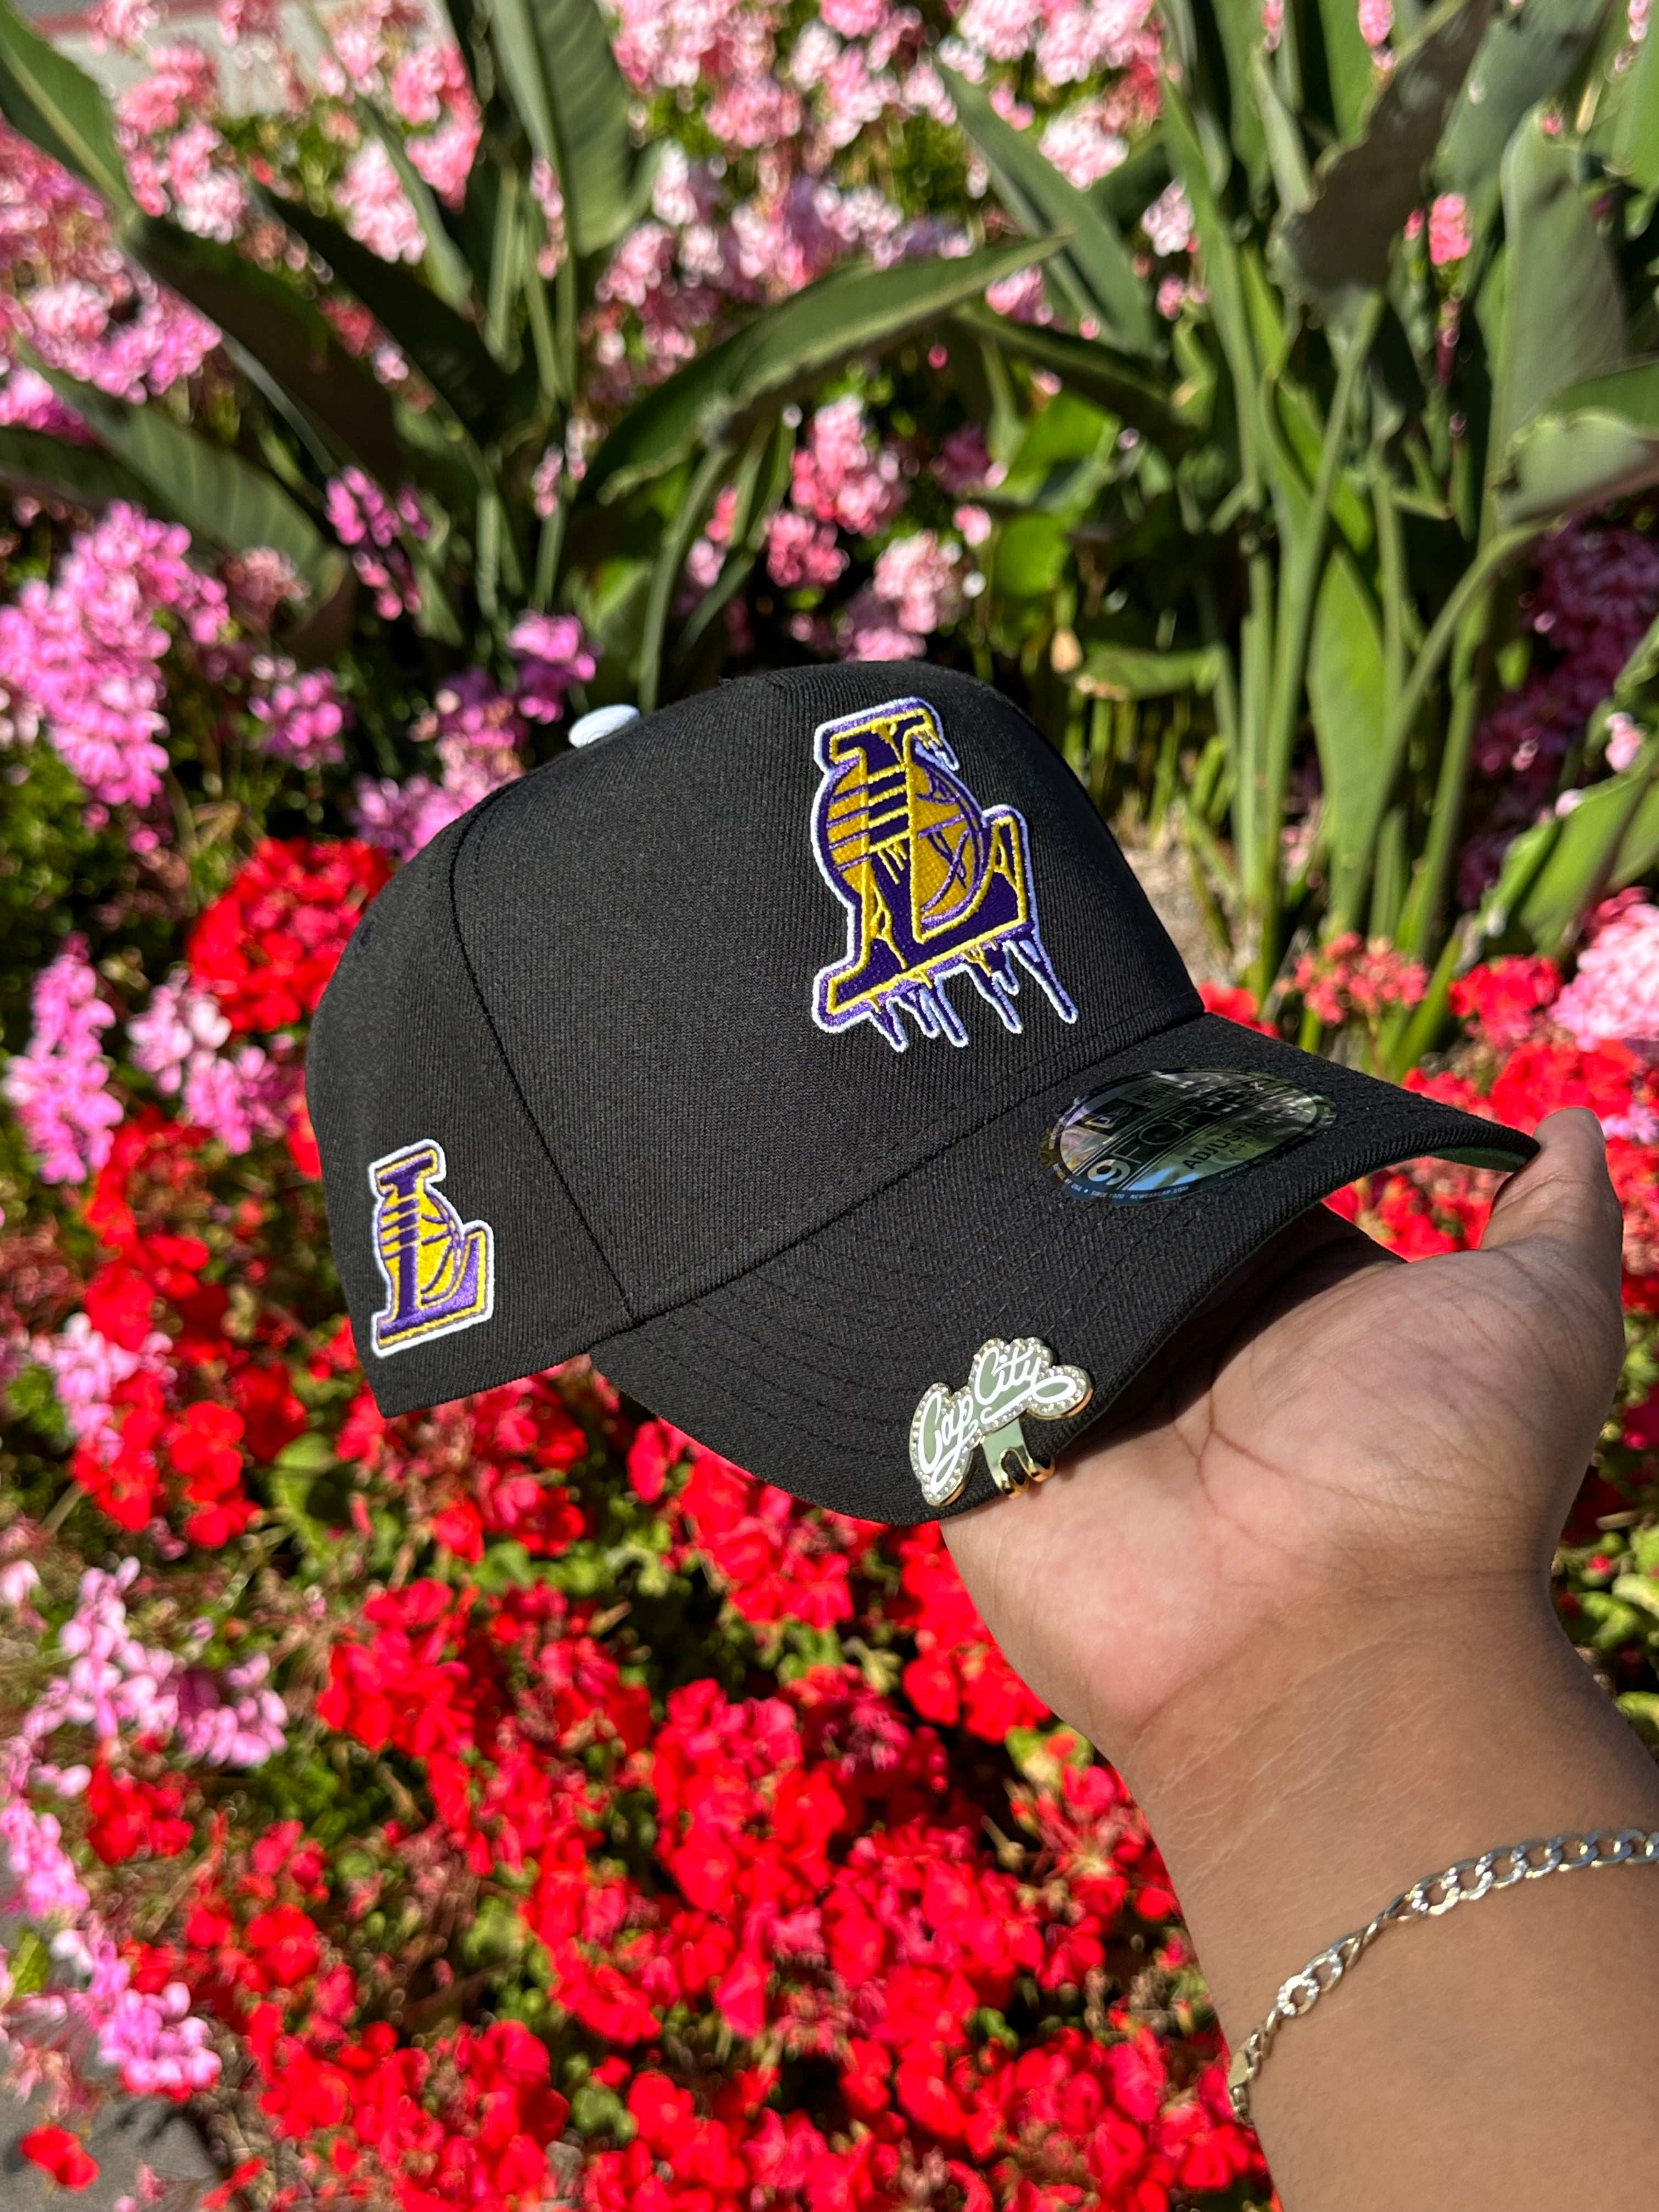 NEW ERA EXCLUSIVE 9FORTY A-FRAME BLACK LOS ANGELES LAKERS DRIP LOGO W/ LAKERS LOGO SIDE PATCH